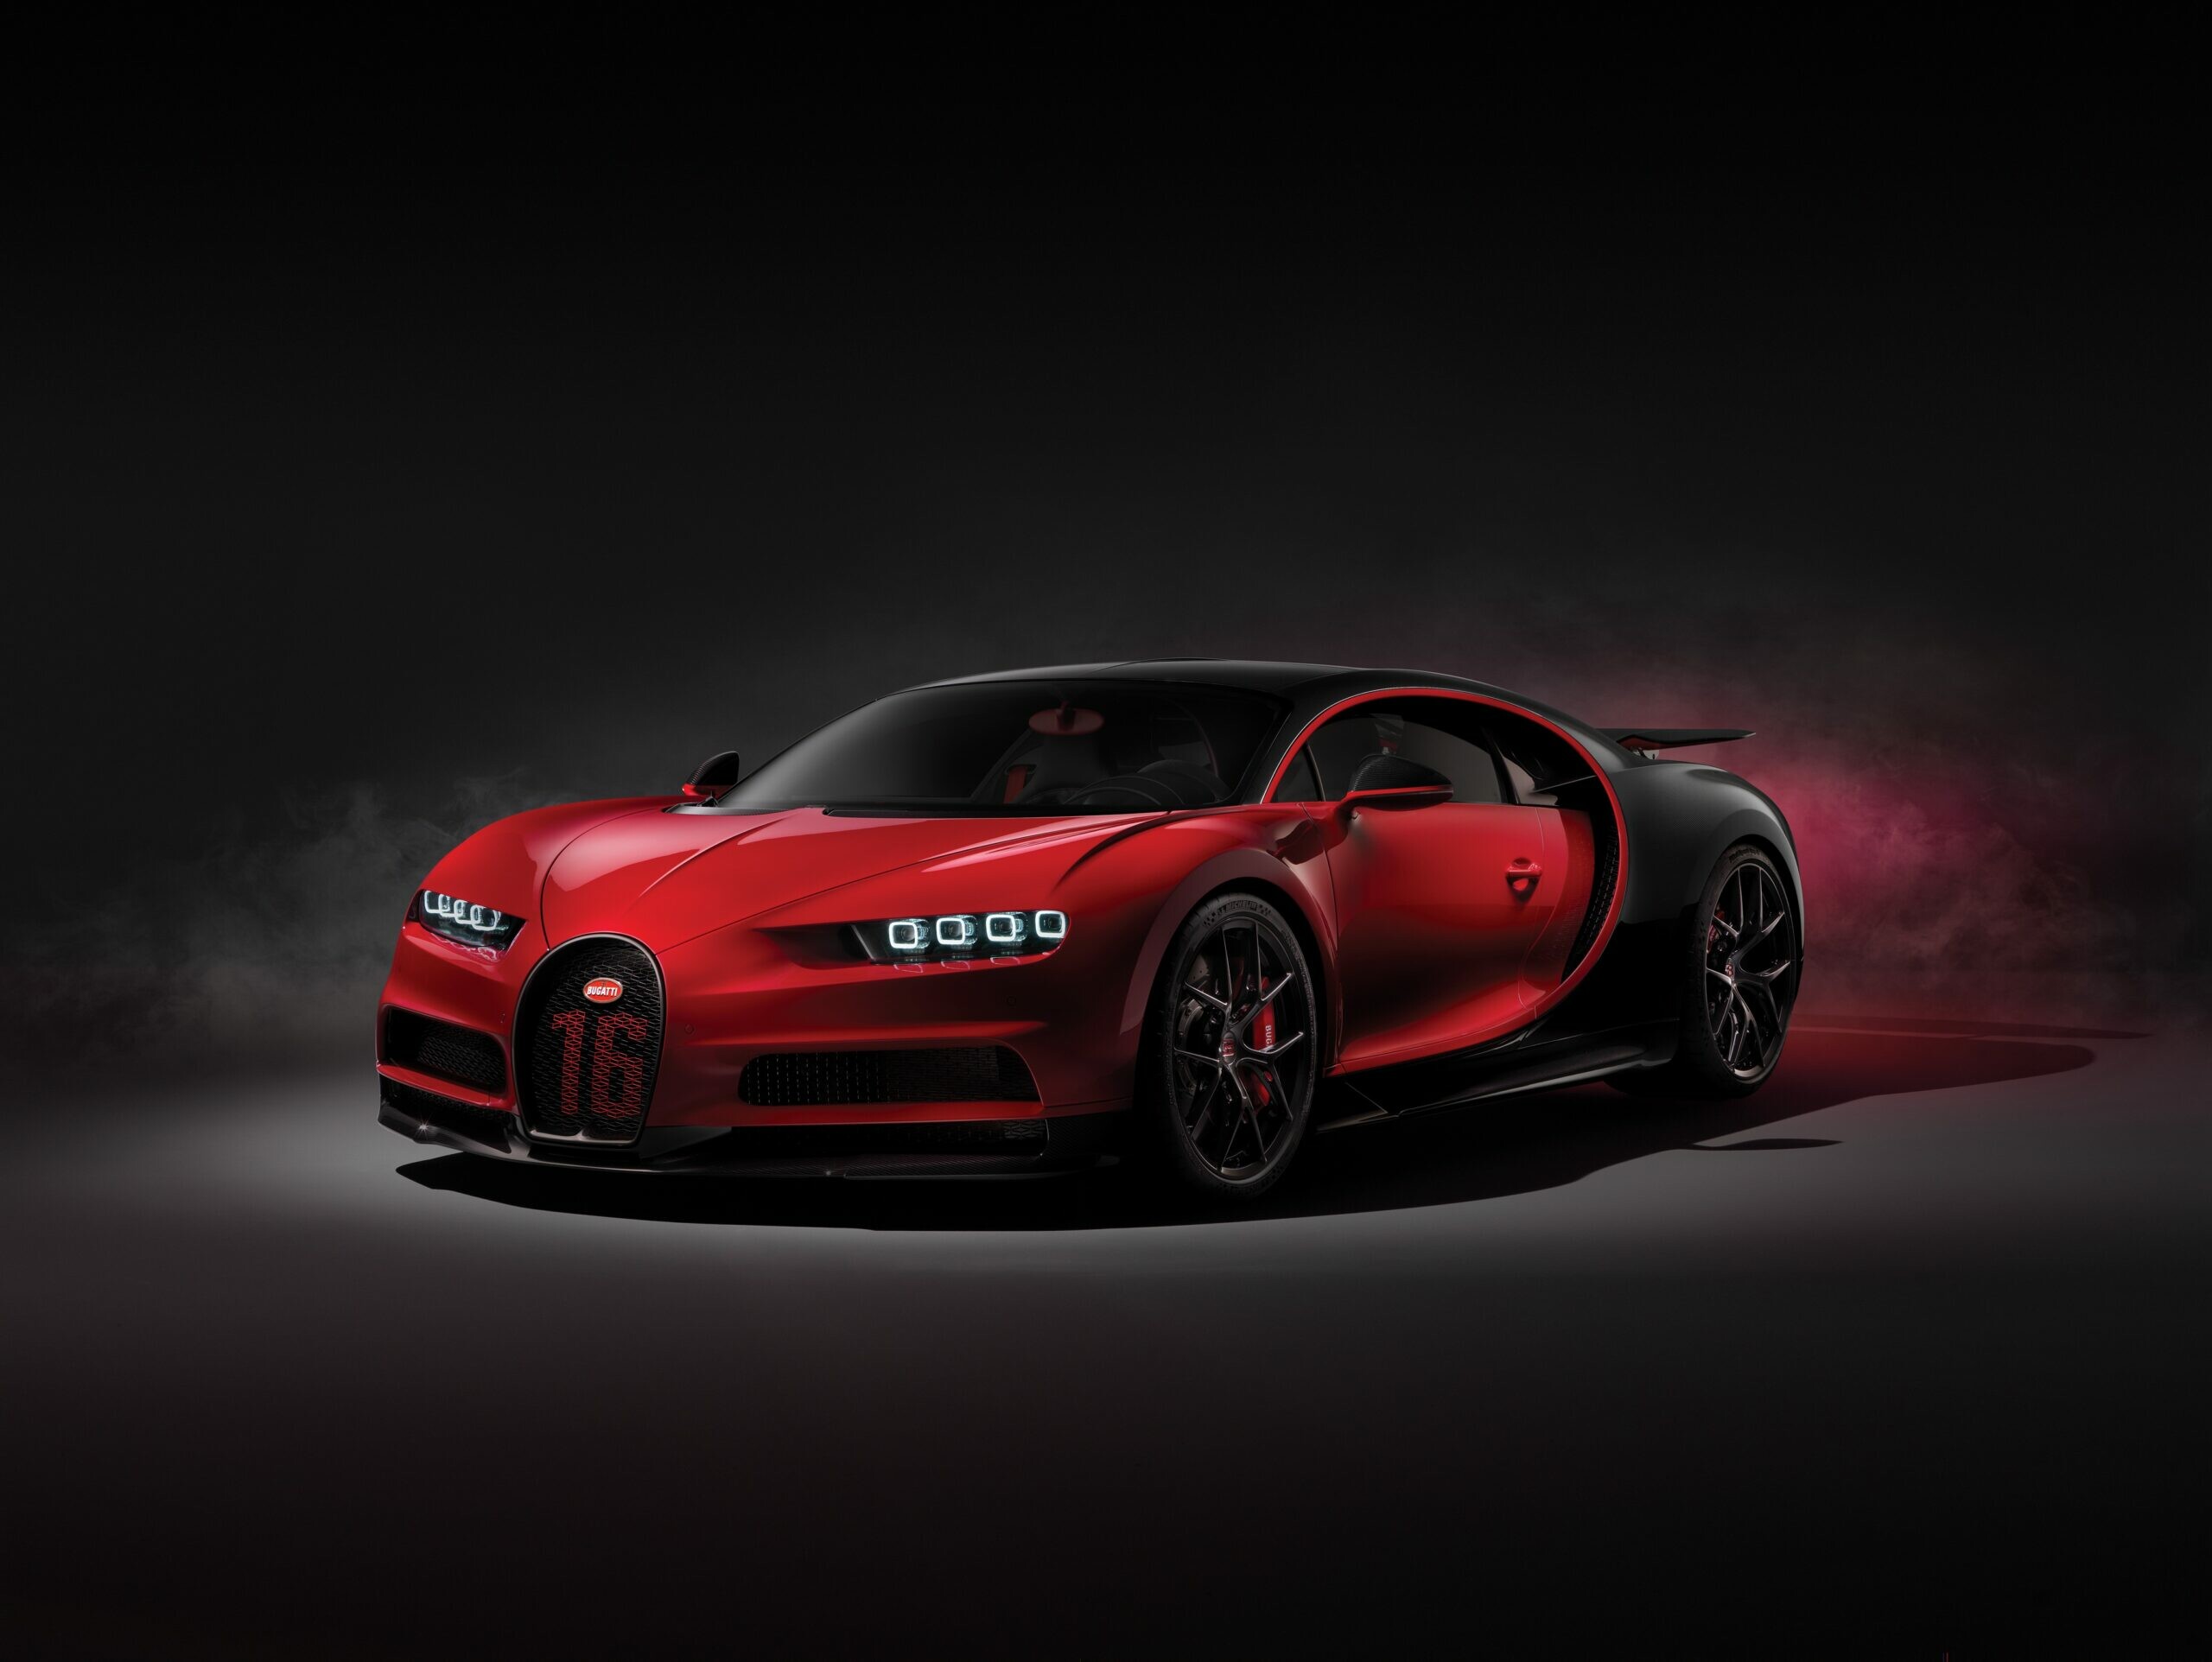 Bugatti: The Chiron was first shown at the Geneva Motor Show on 1 March 2016. 2560x1930 HD Wallpaper.